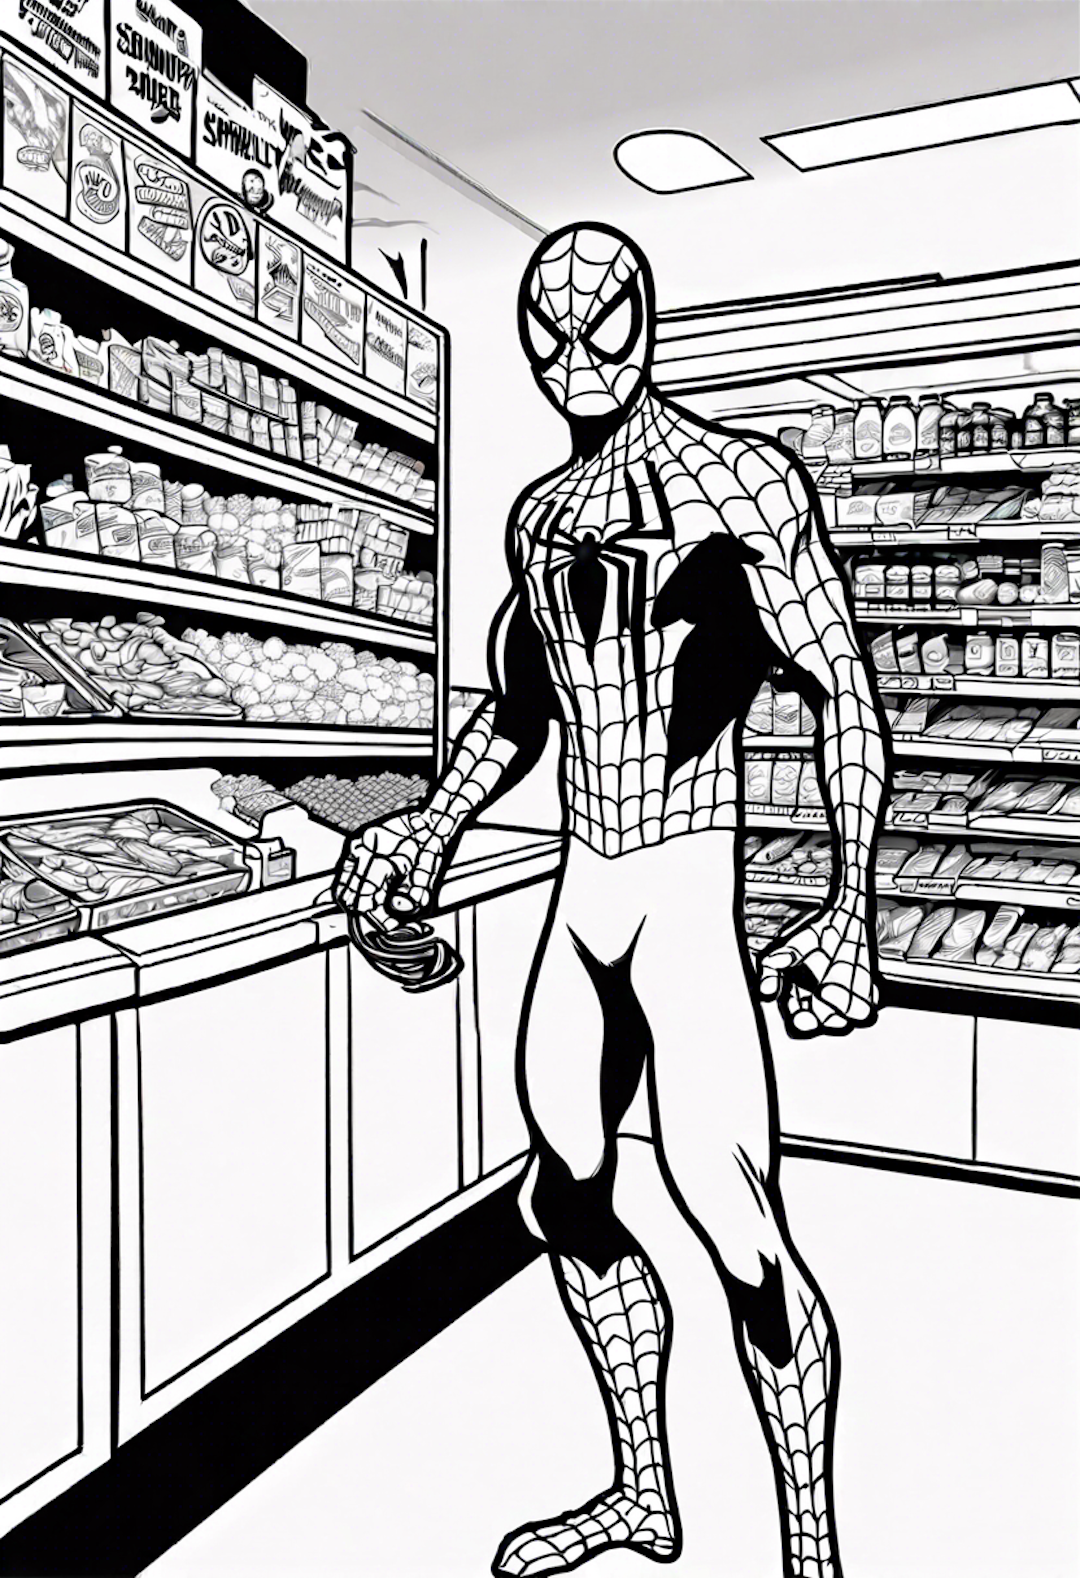 Spiderman Stopping A Robbery In A Convenience Store